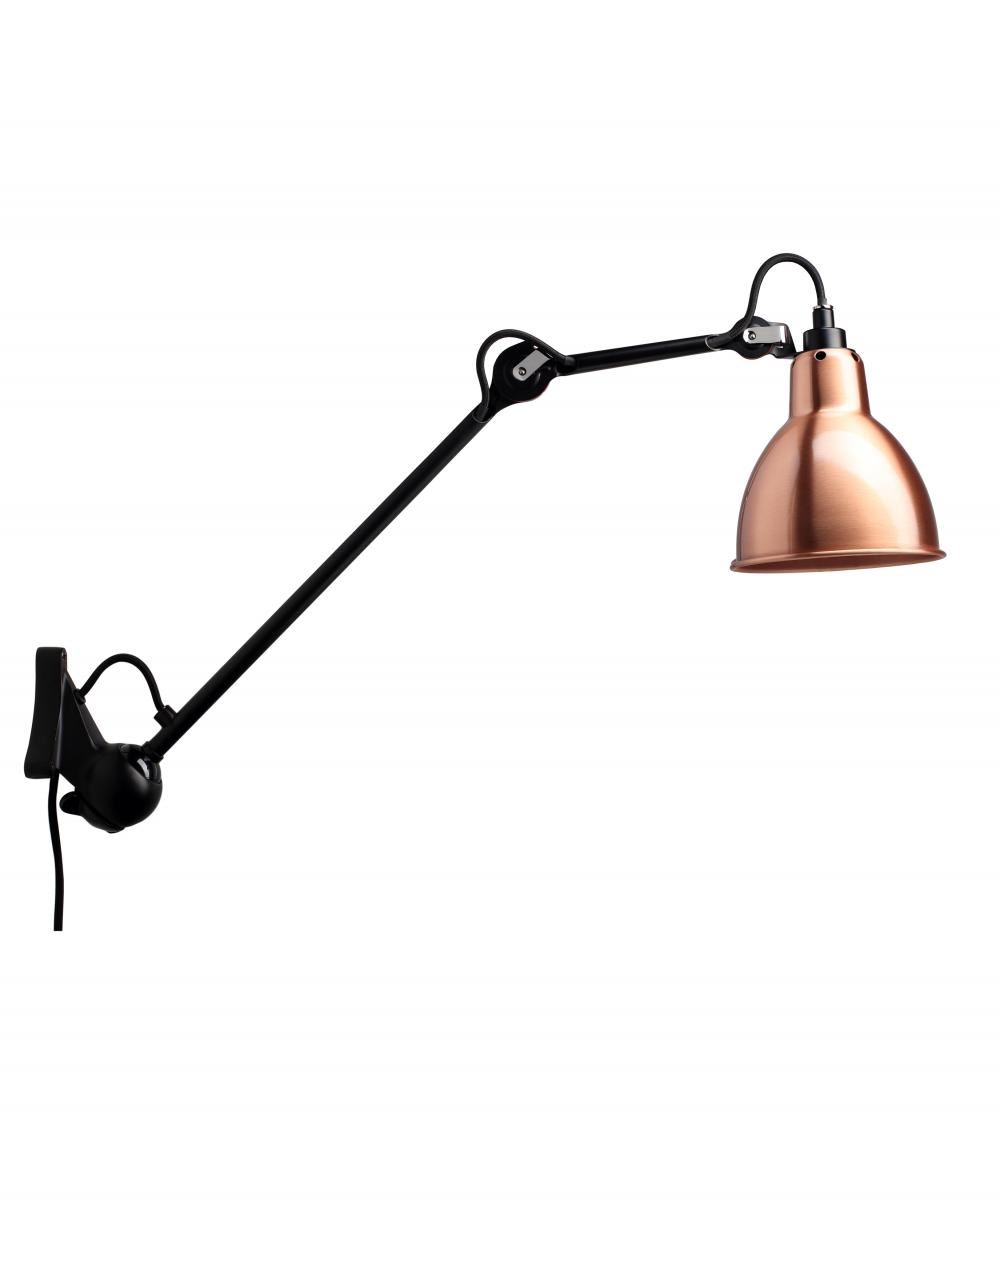 Lampe Gras 222 Wall Light Black Arm Copper Shade Round Shade